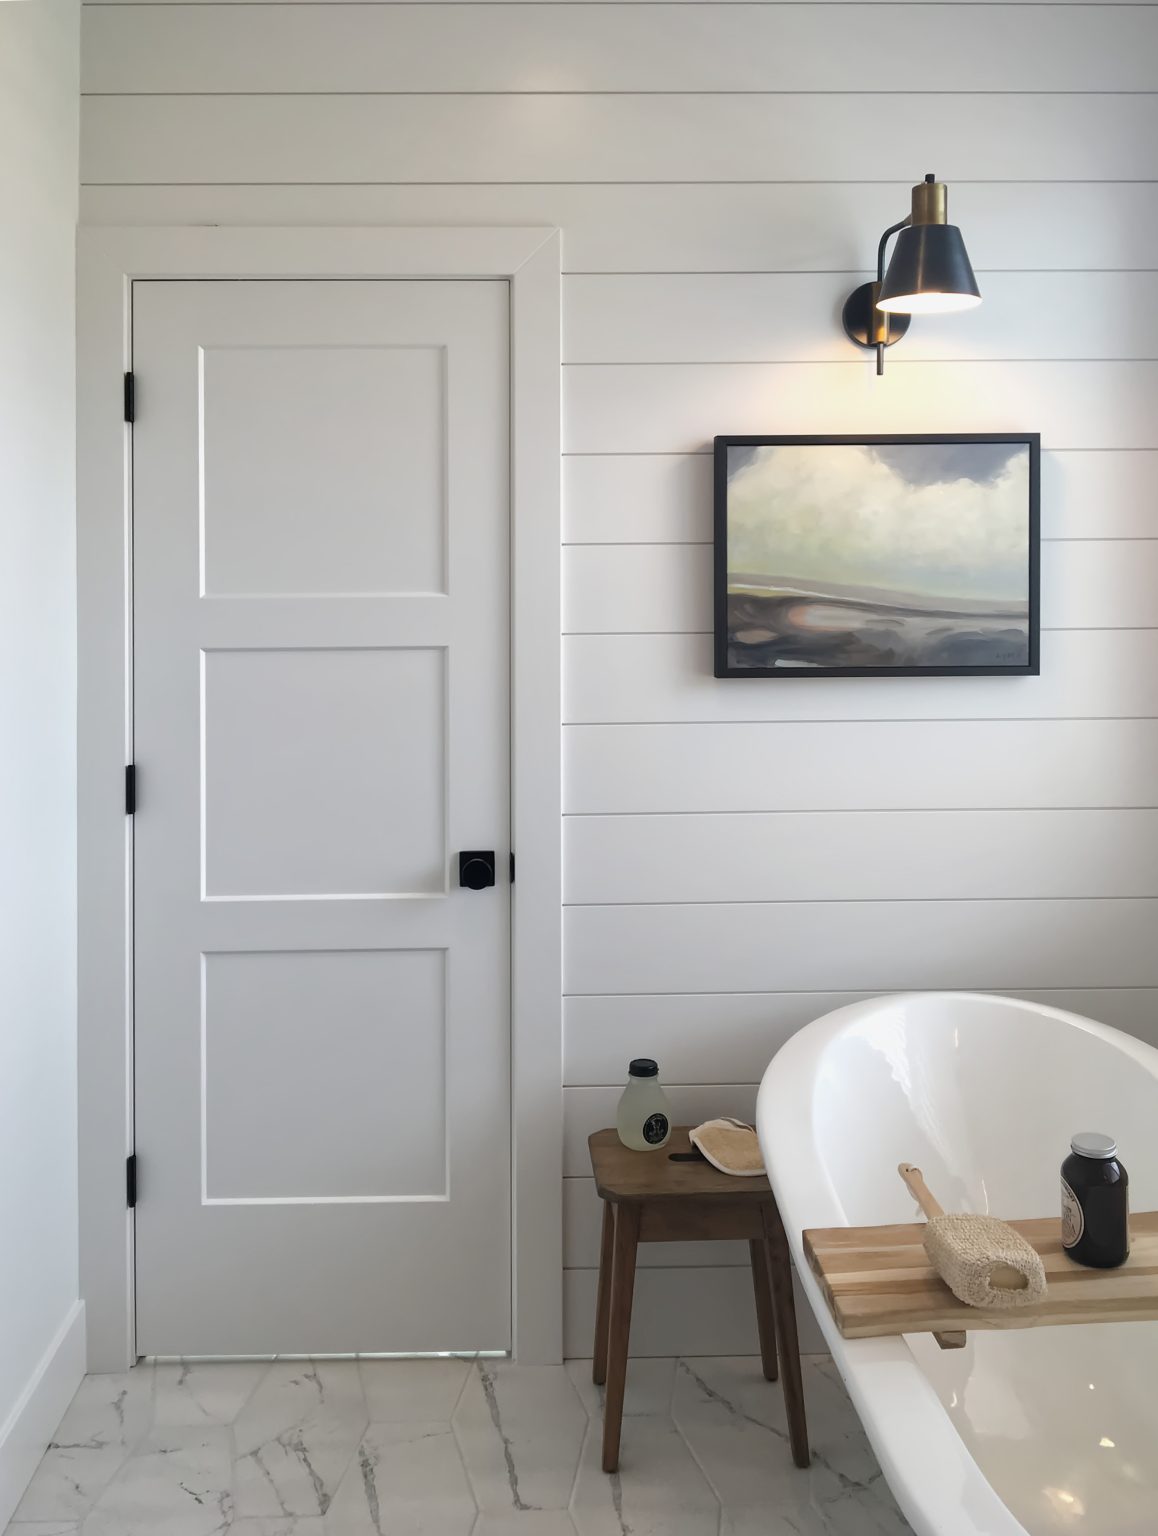 White Bathroom door with bath tub and painting